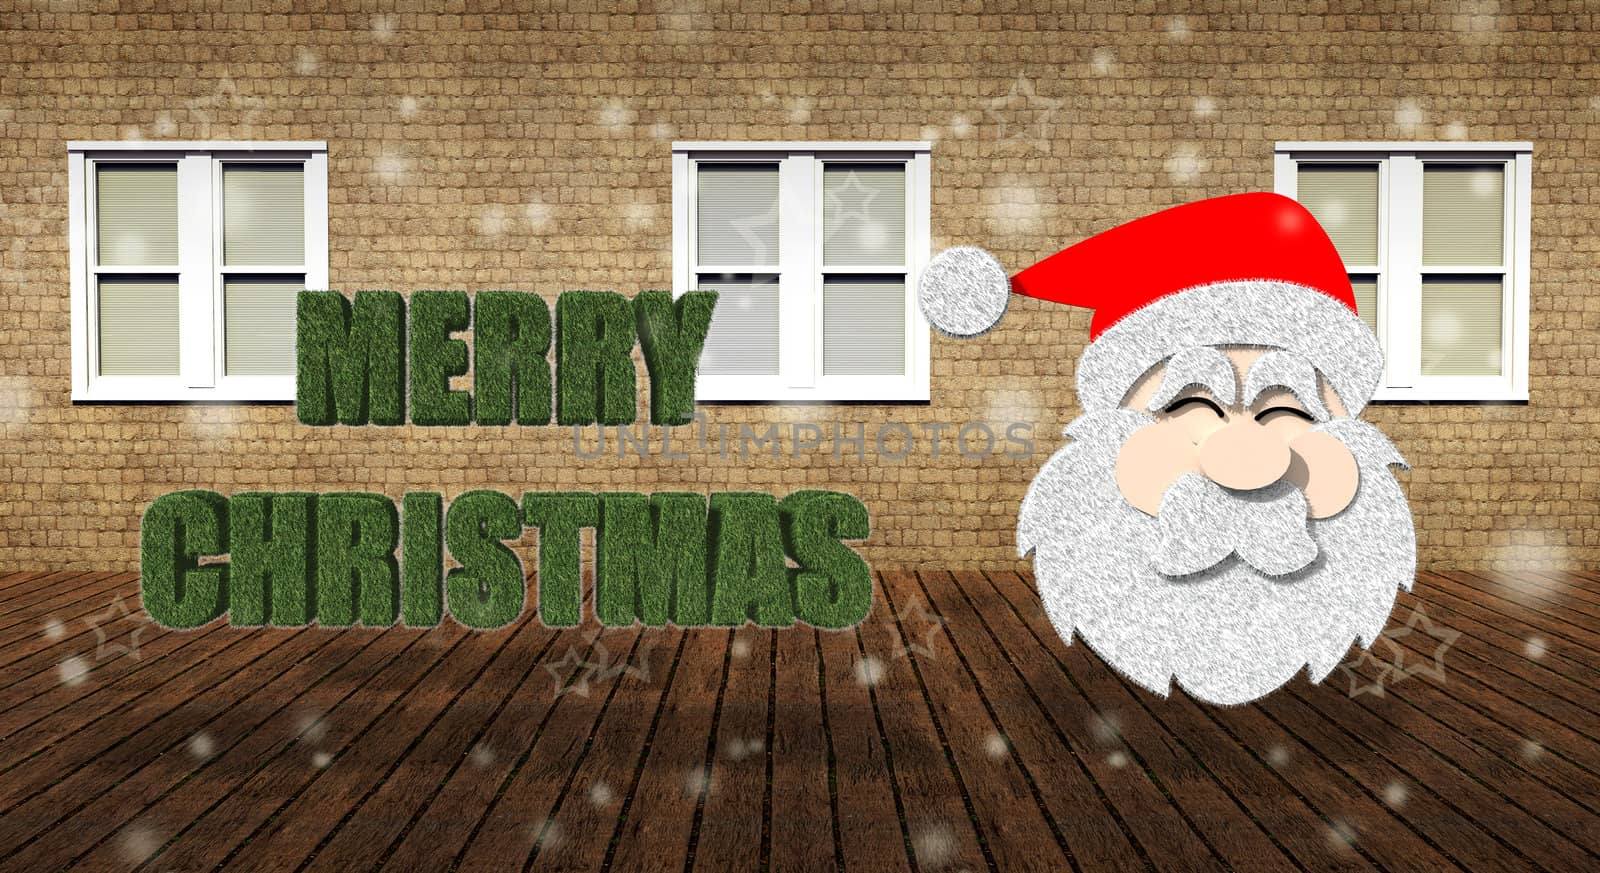 Merry Christmas with Santa Claus in grunge interior room